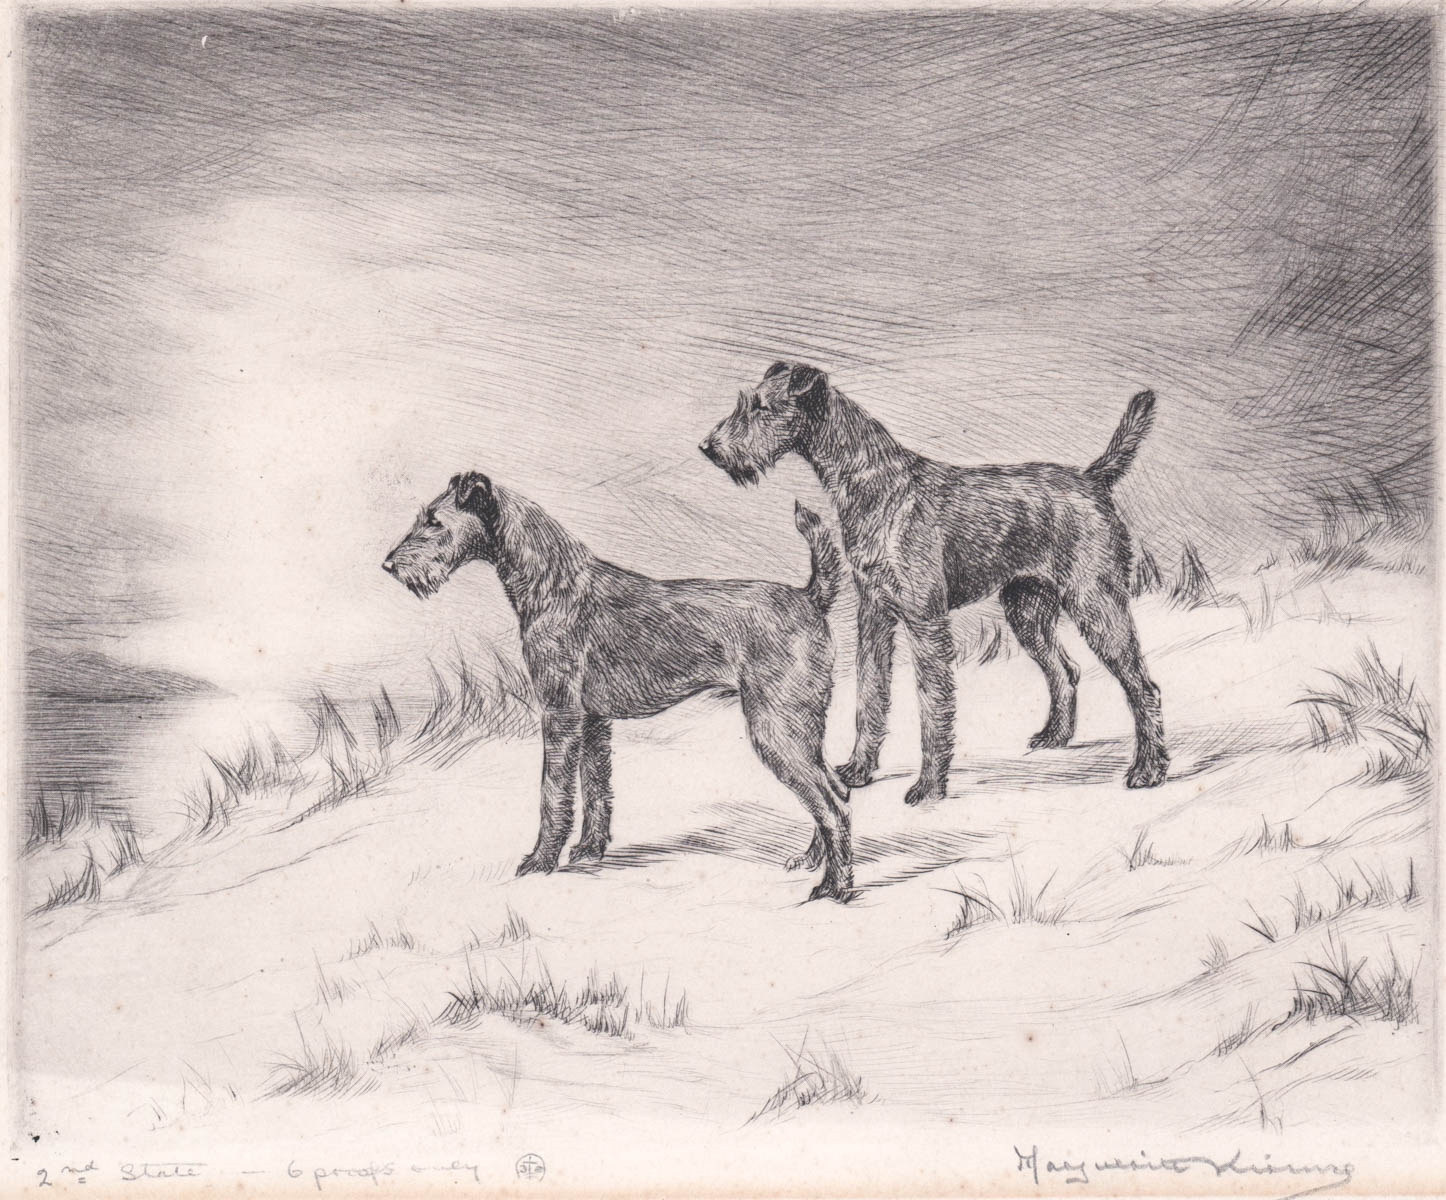 Artwork by Marguerite Kirmse, Marguerite Kirmse Etching Signed [Dogs], Made of Etching